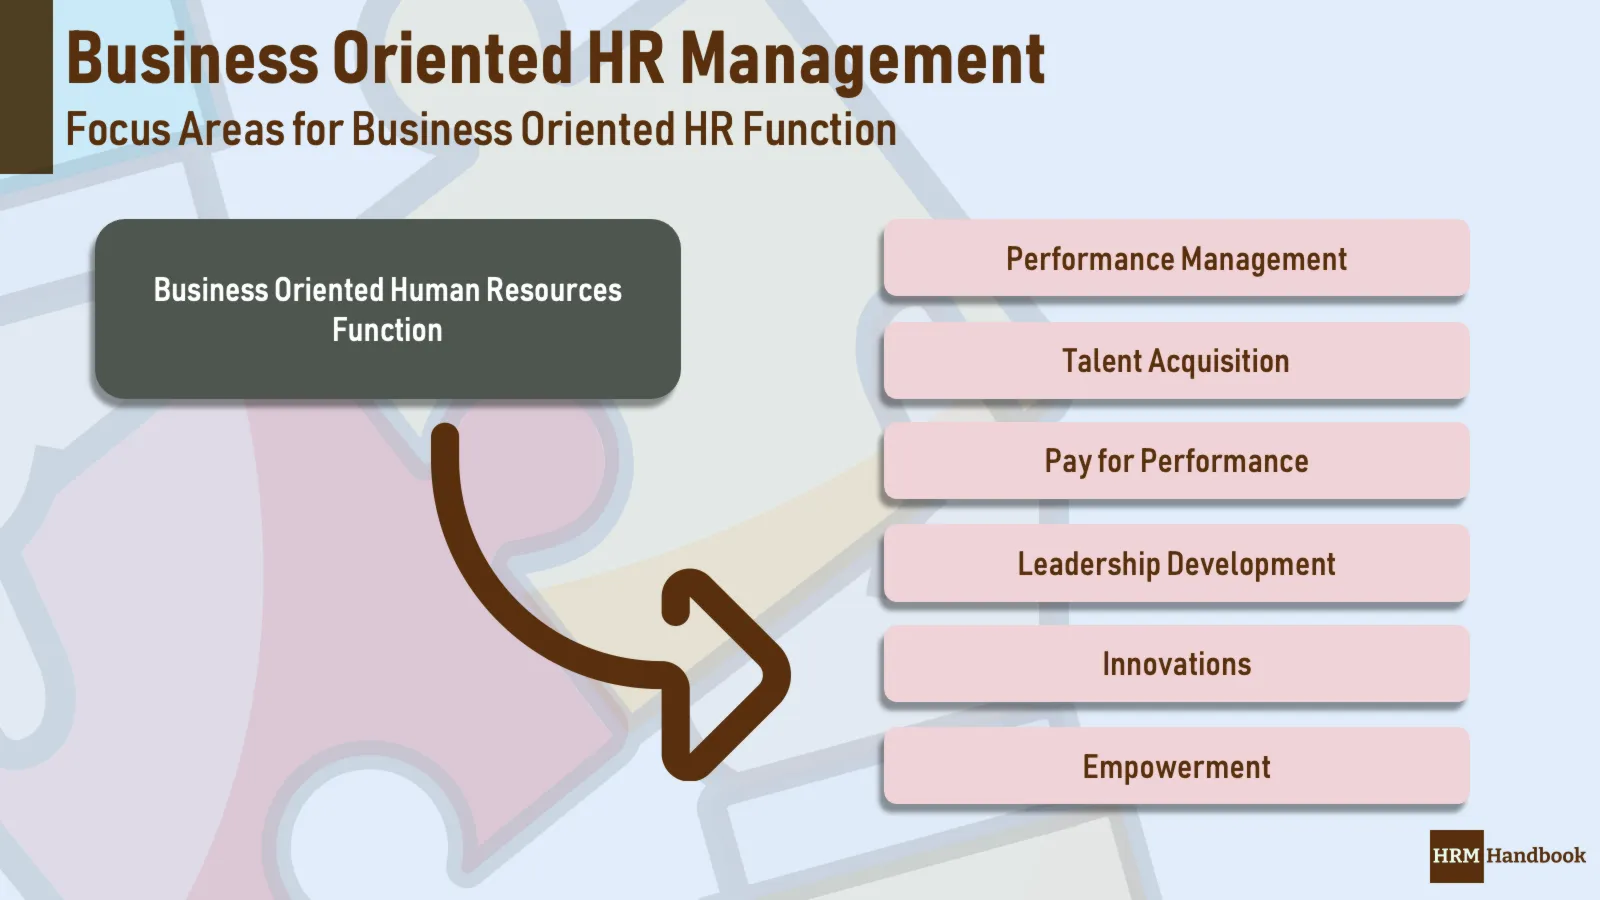 Key Areas of Focus and Interest of Business Oriented HR Management